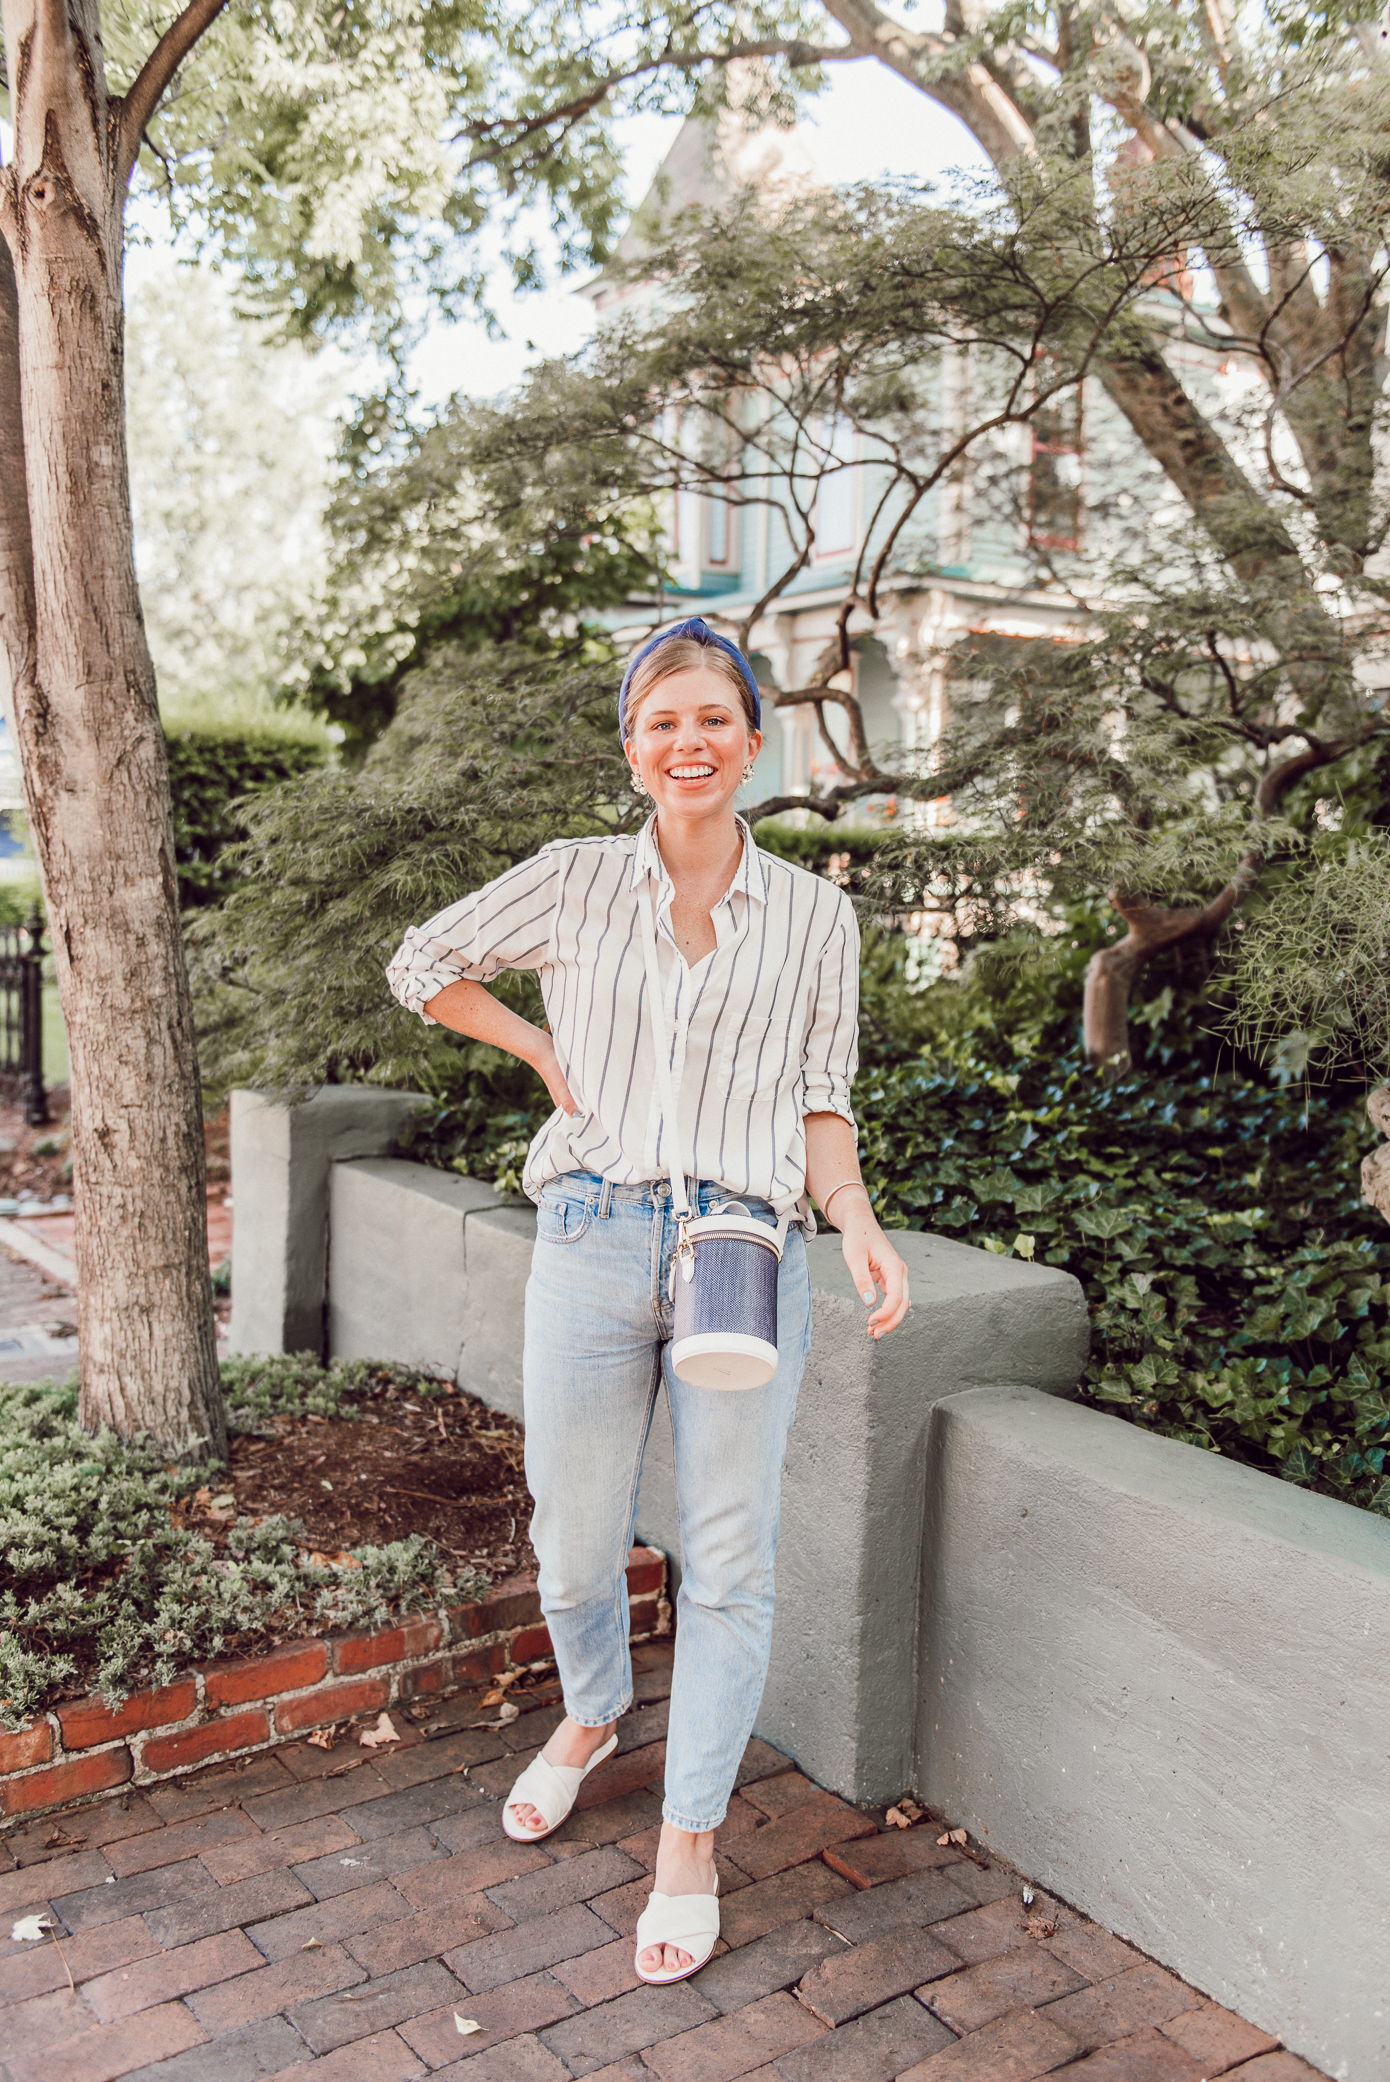 Blue and White Outfit Idea | Blue and White Striped Button Down Shirt, Relaxed Boyfriend Jeans under $100, Denim Headband | Louella Reese